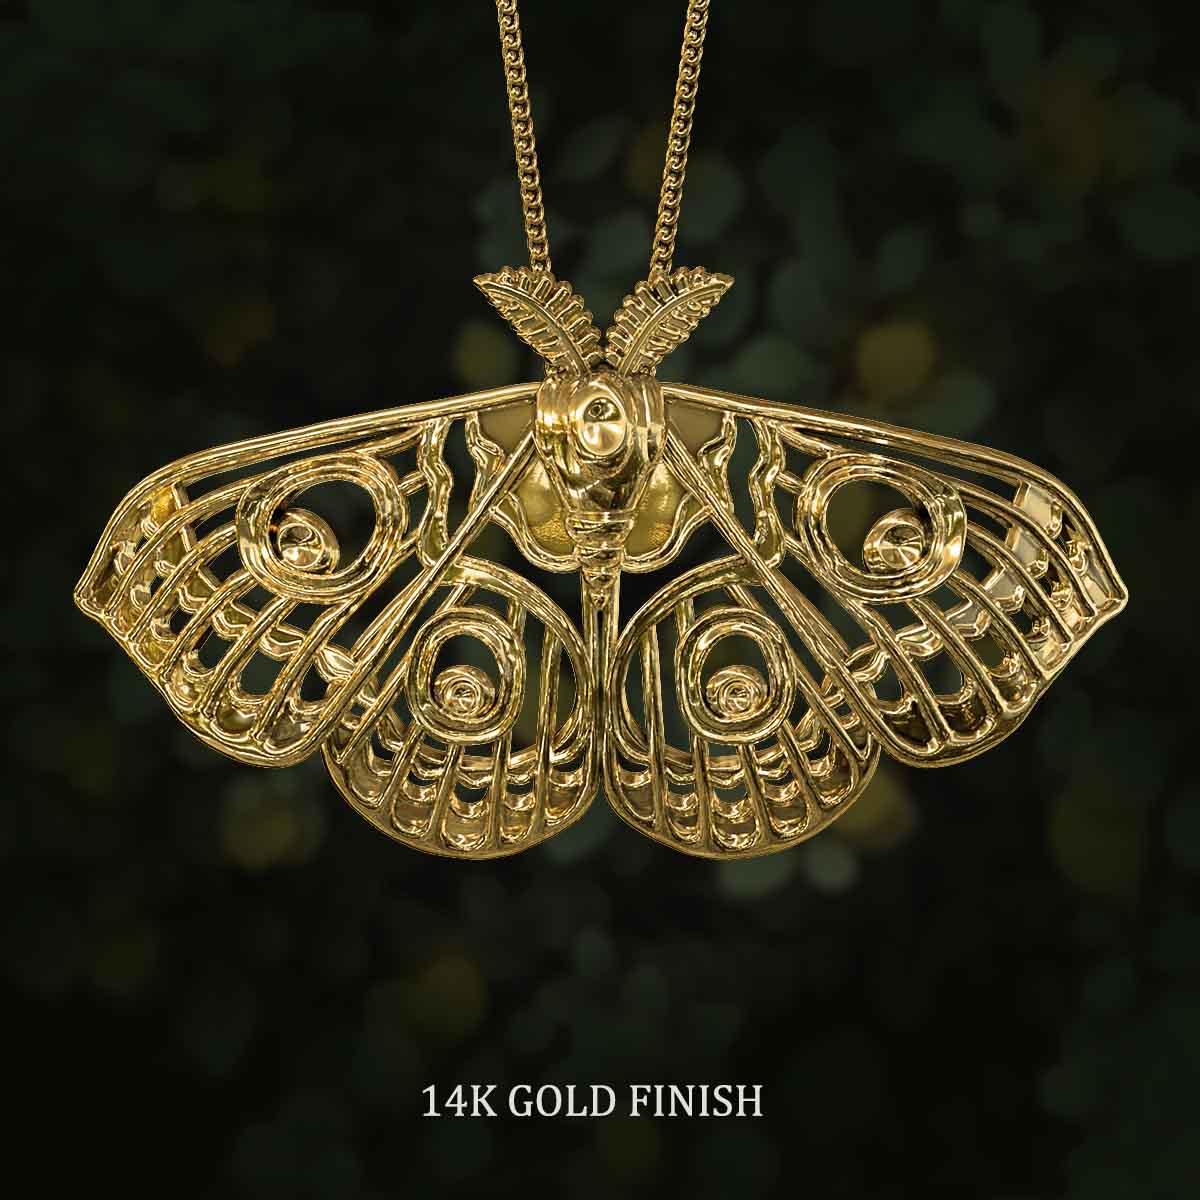 14k-Gold-Finish-Arabella-Moth-Pendant-Jewelry-For-Necklace